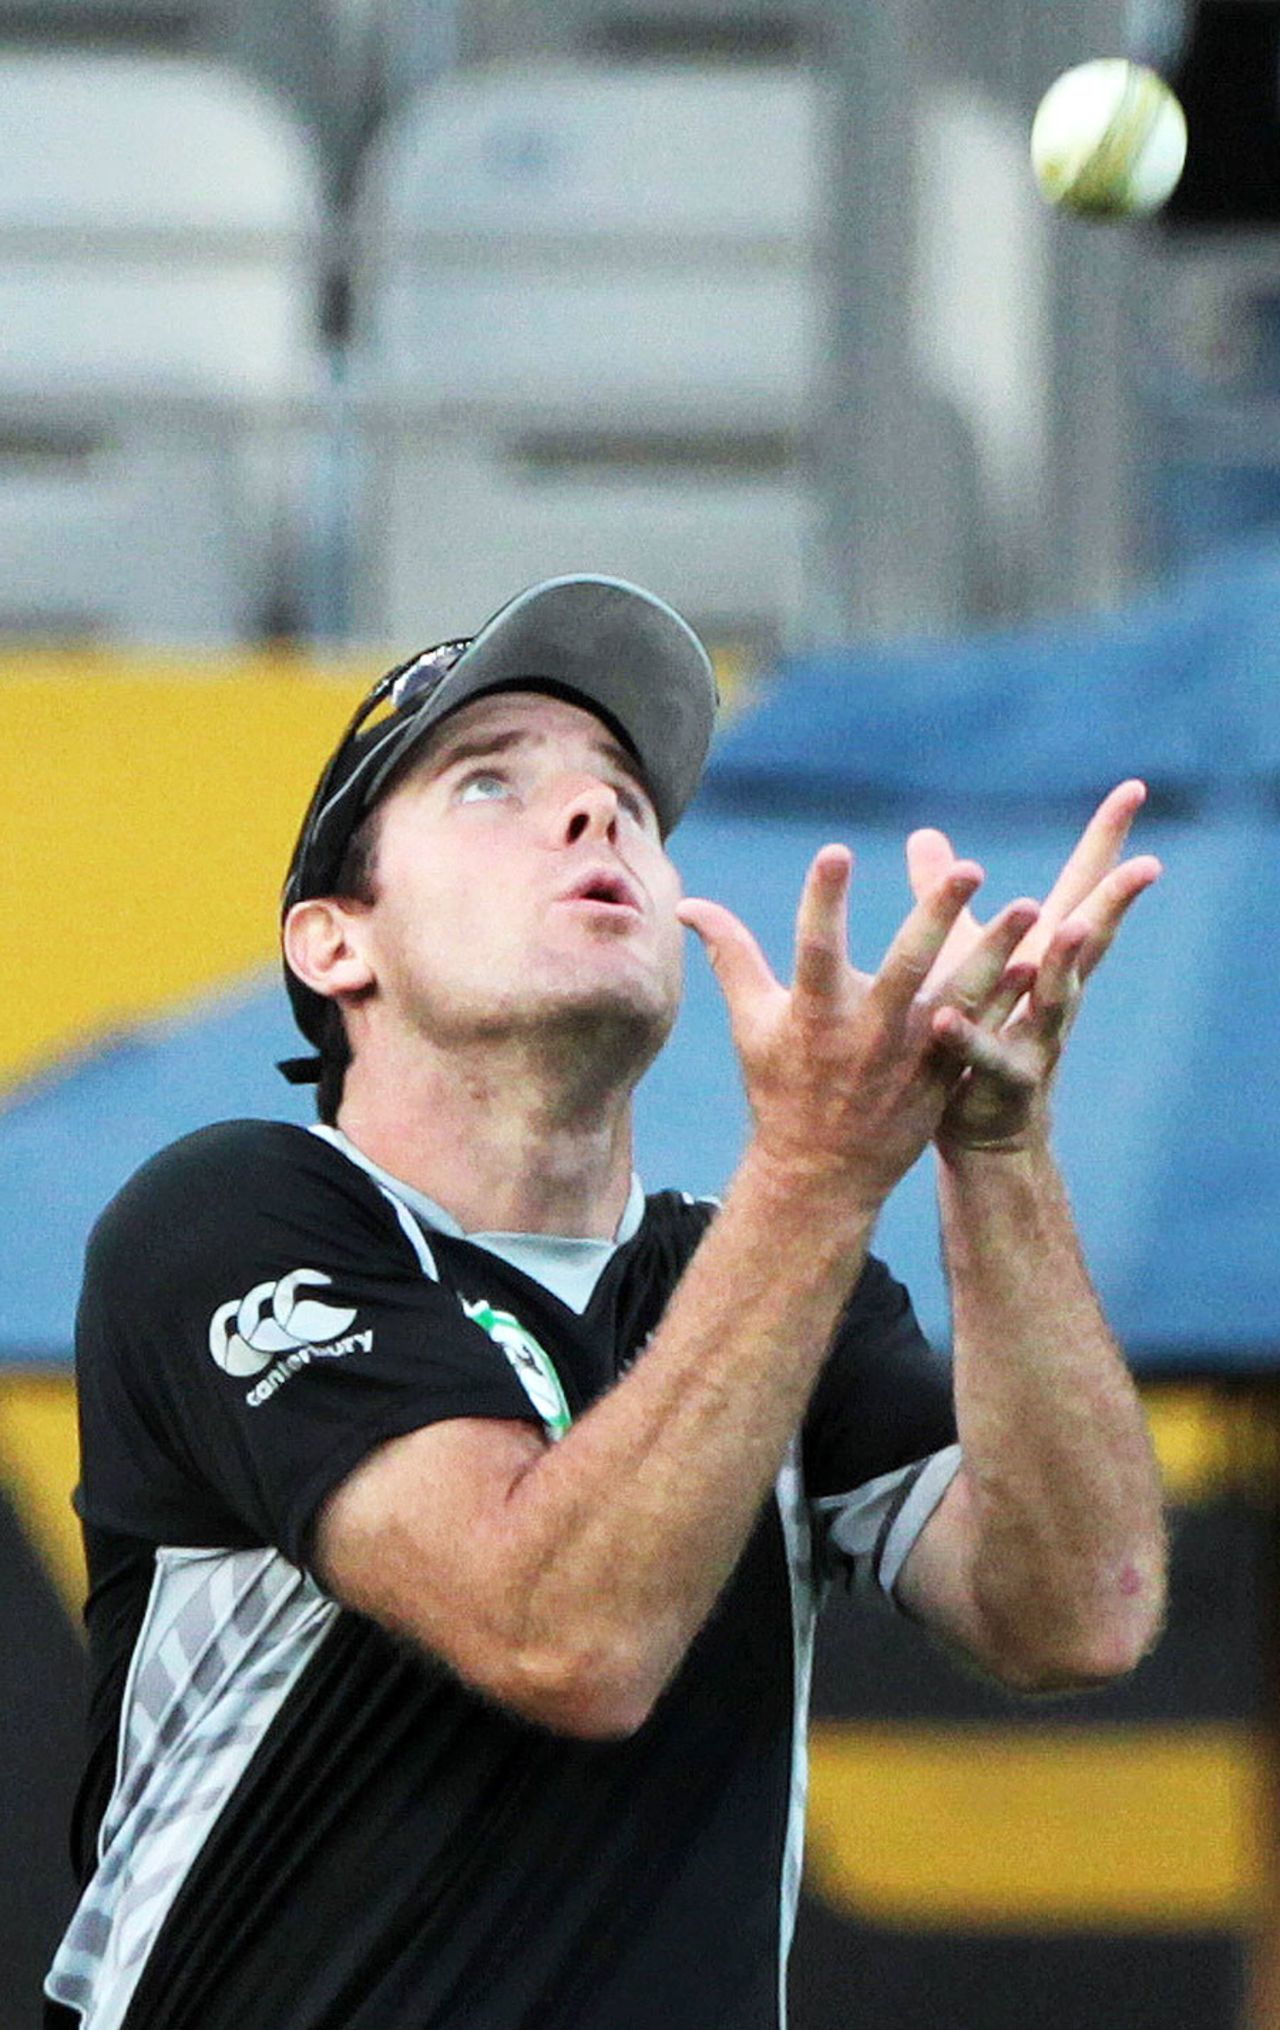 Jamie How took the final catch to seal a consolation win for New Zealand, New Zealand v Pakistan, 6th ODI, Auckland, February 5, 2011